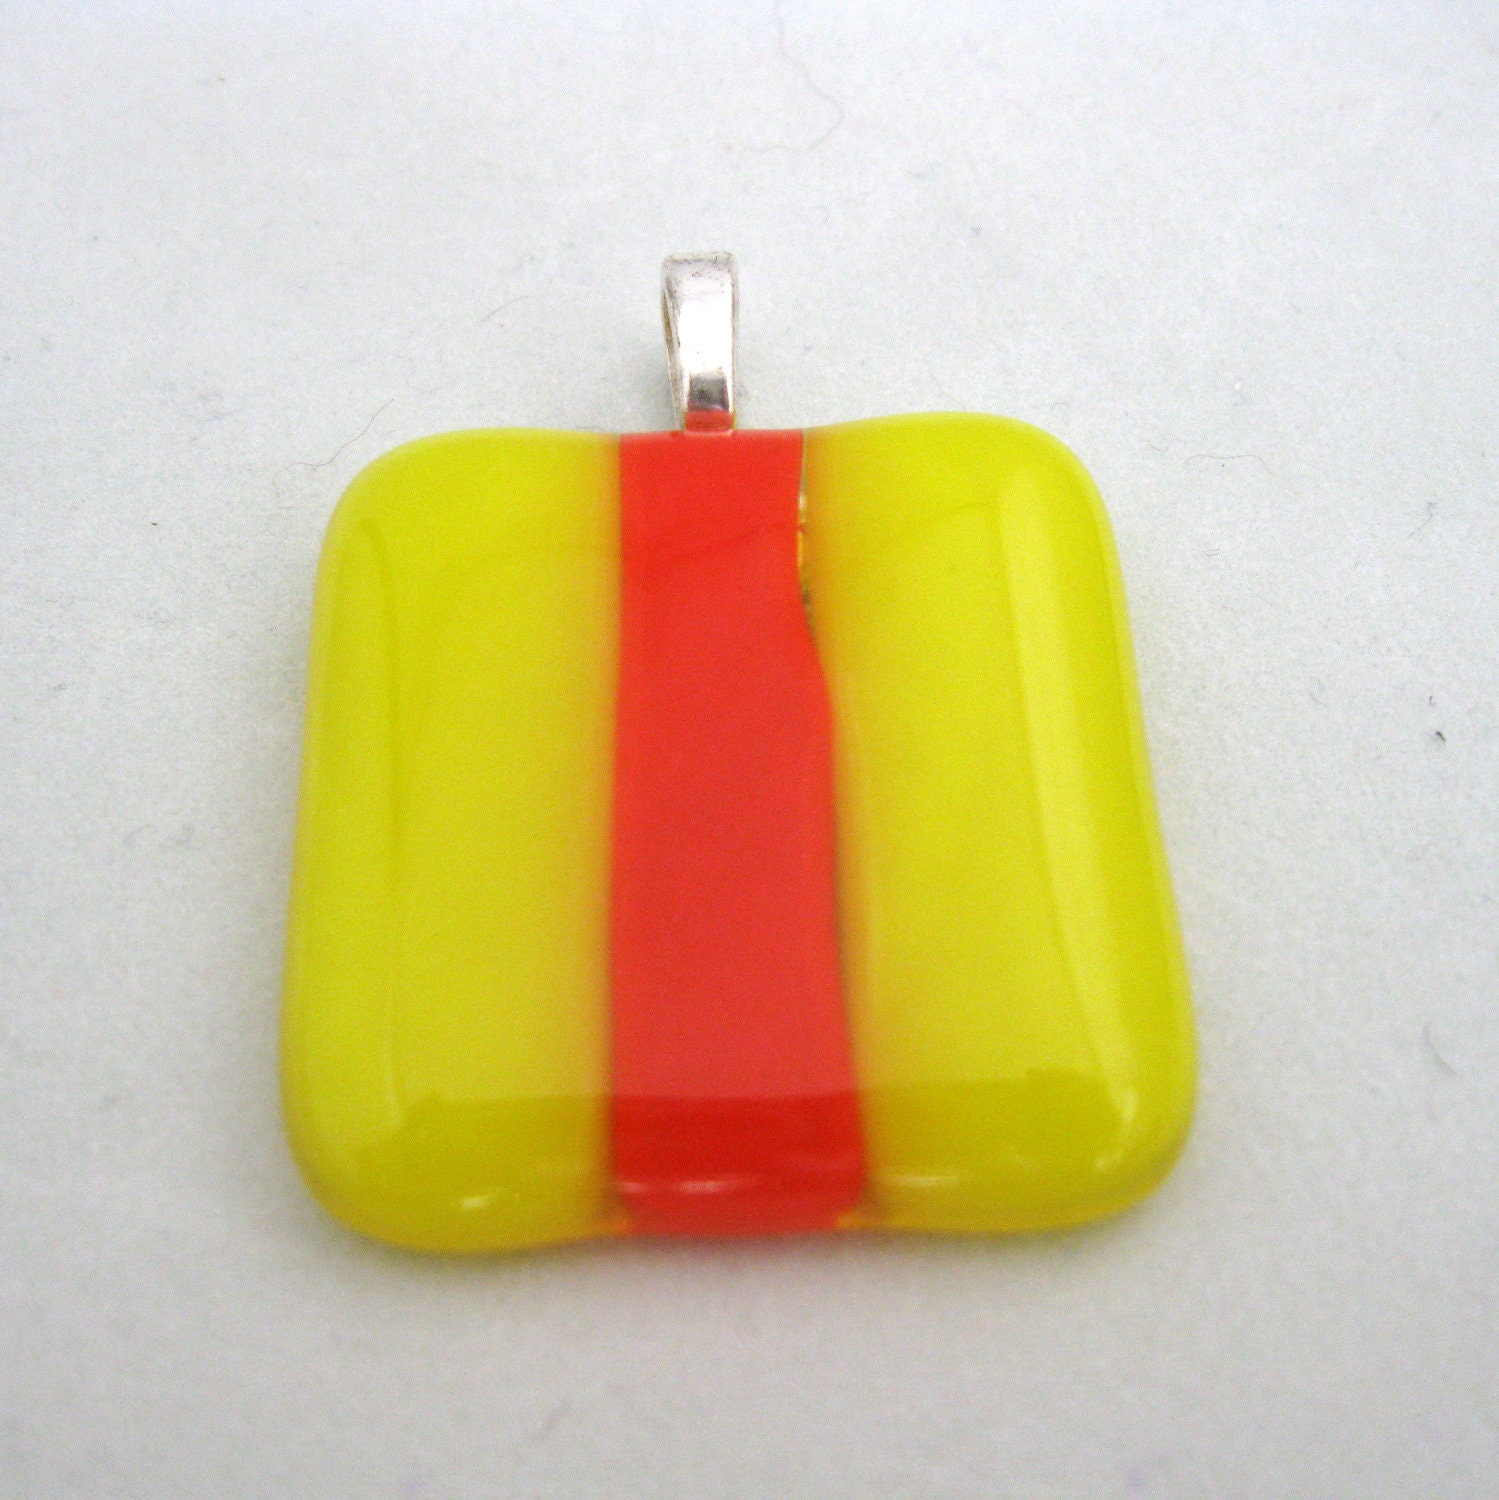 bright yellow red jewelry - Surfer, red and yellow, colorful, fused glass pendant, colorful necklace for summer - cjyummies